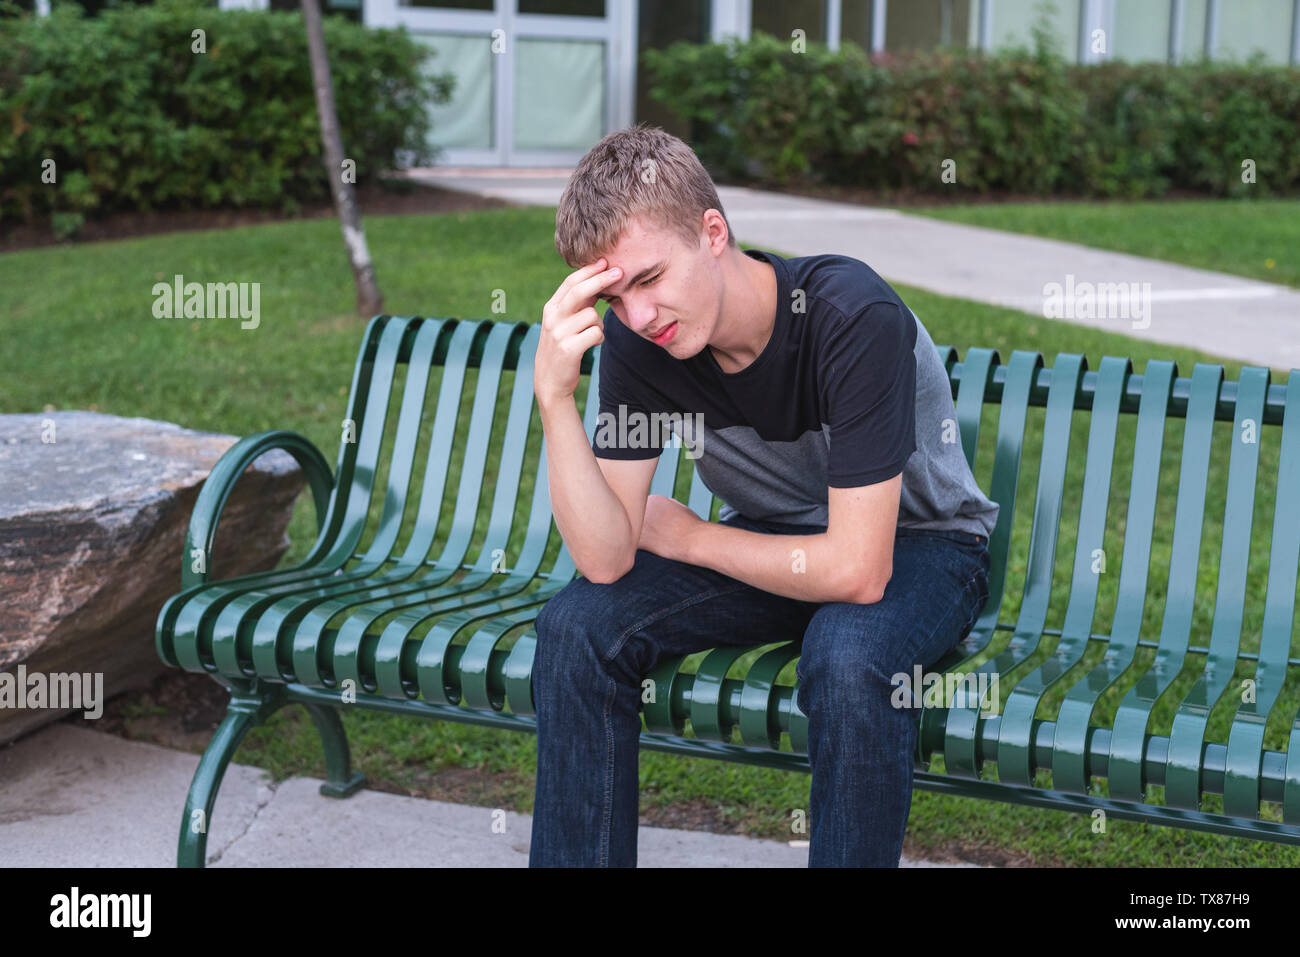 Upset Teenager Sitting On A Bench All Alone Stock Photo Alamy